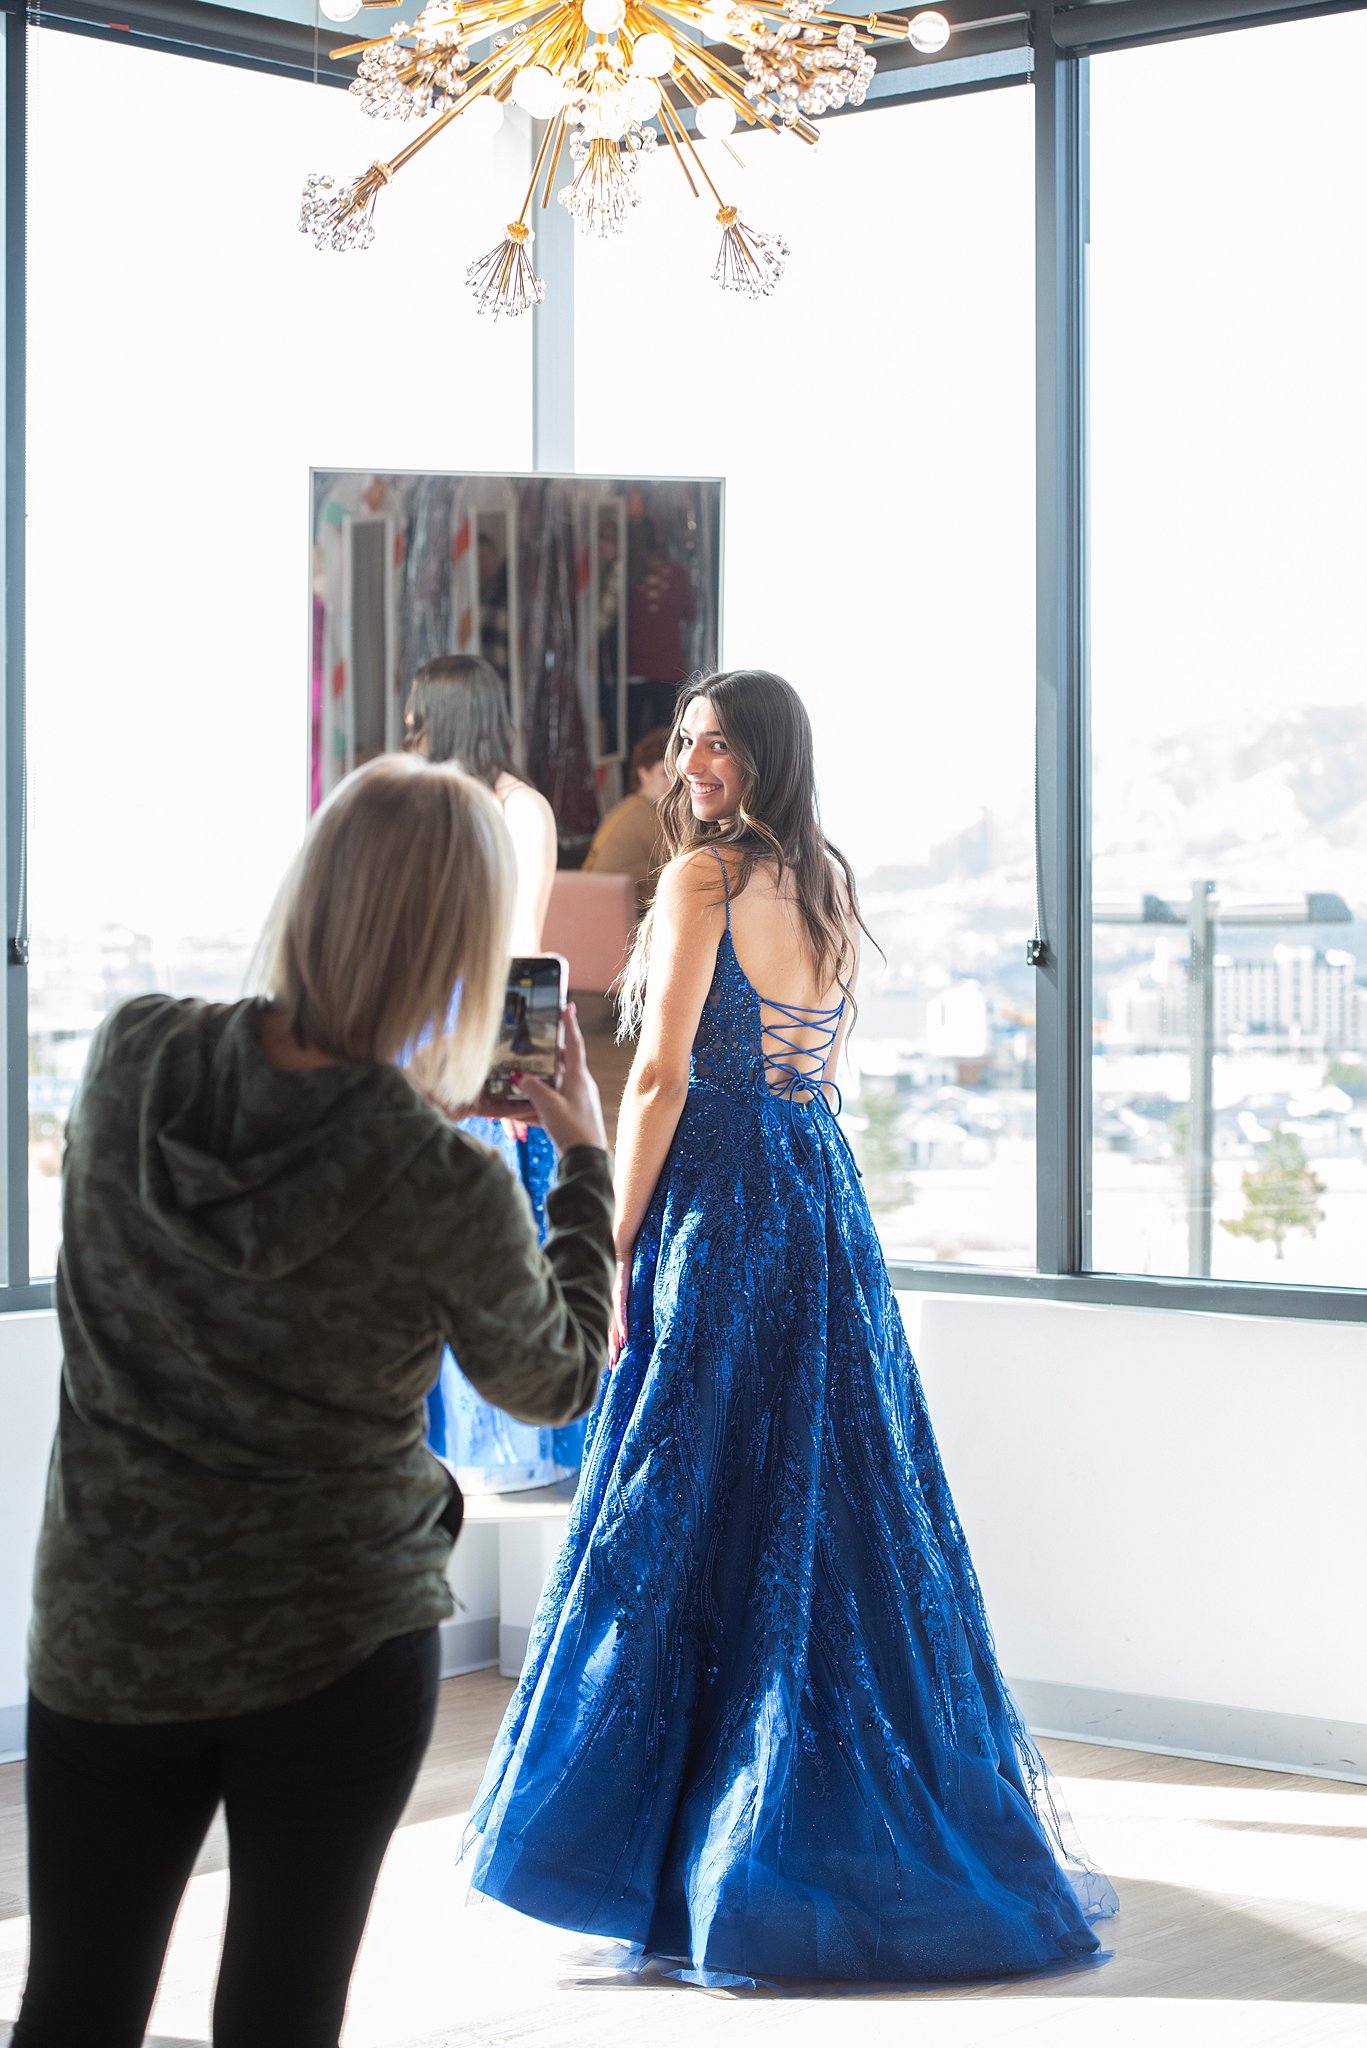 Woman in blue gown stands in front of a mirror while mom takes her photo with a phone